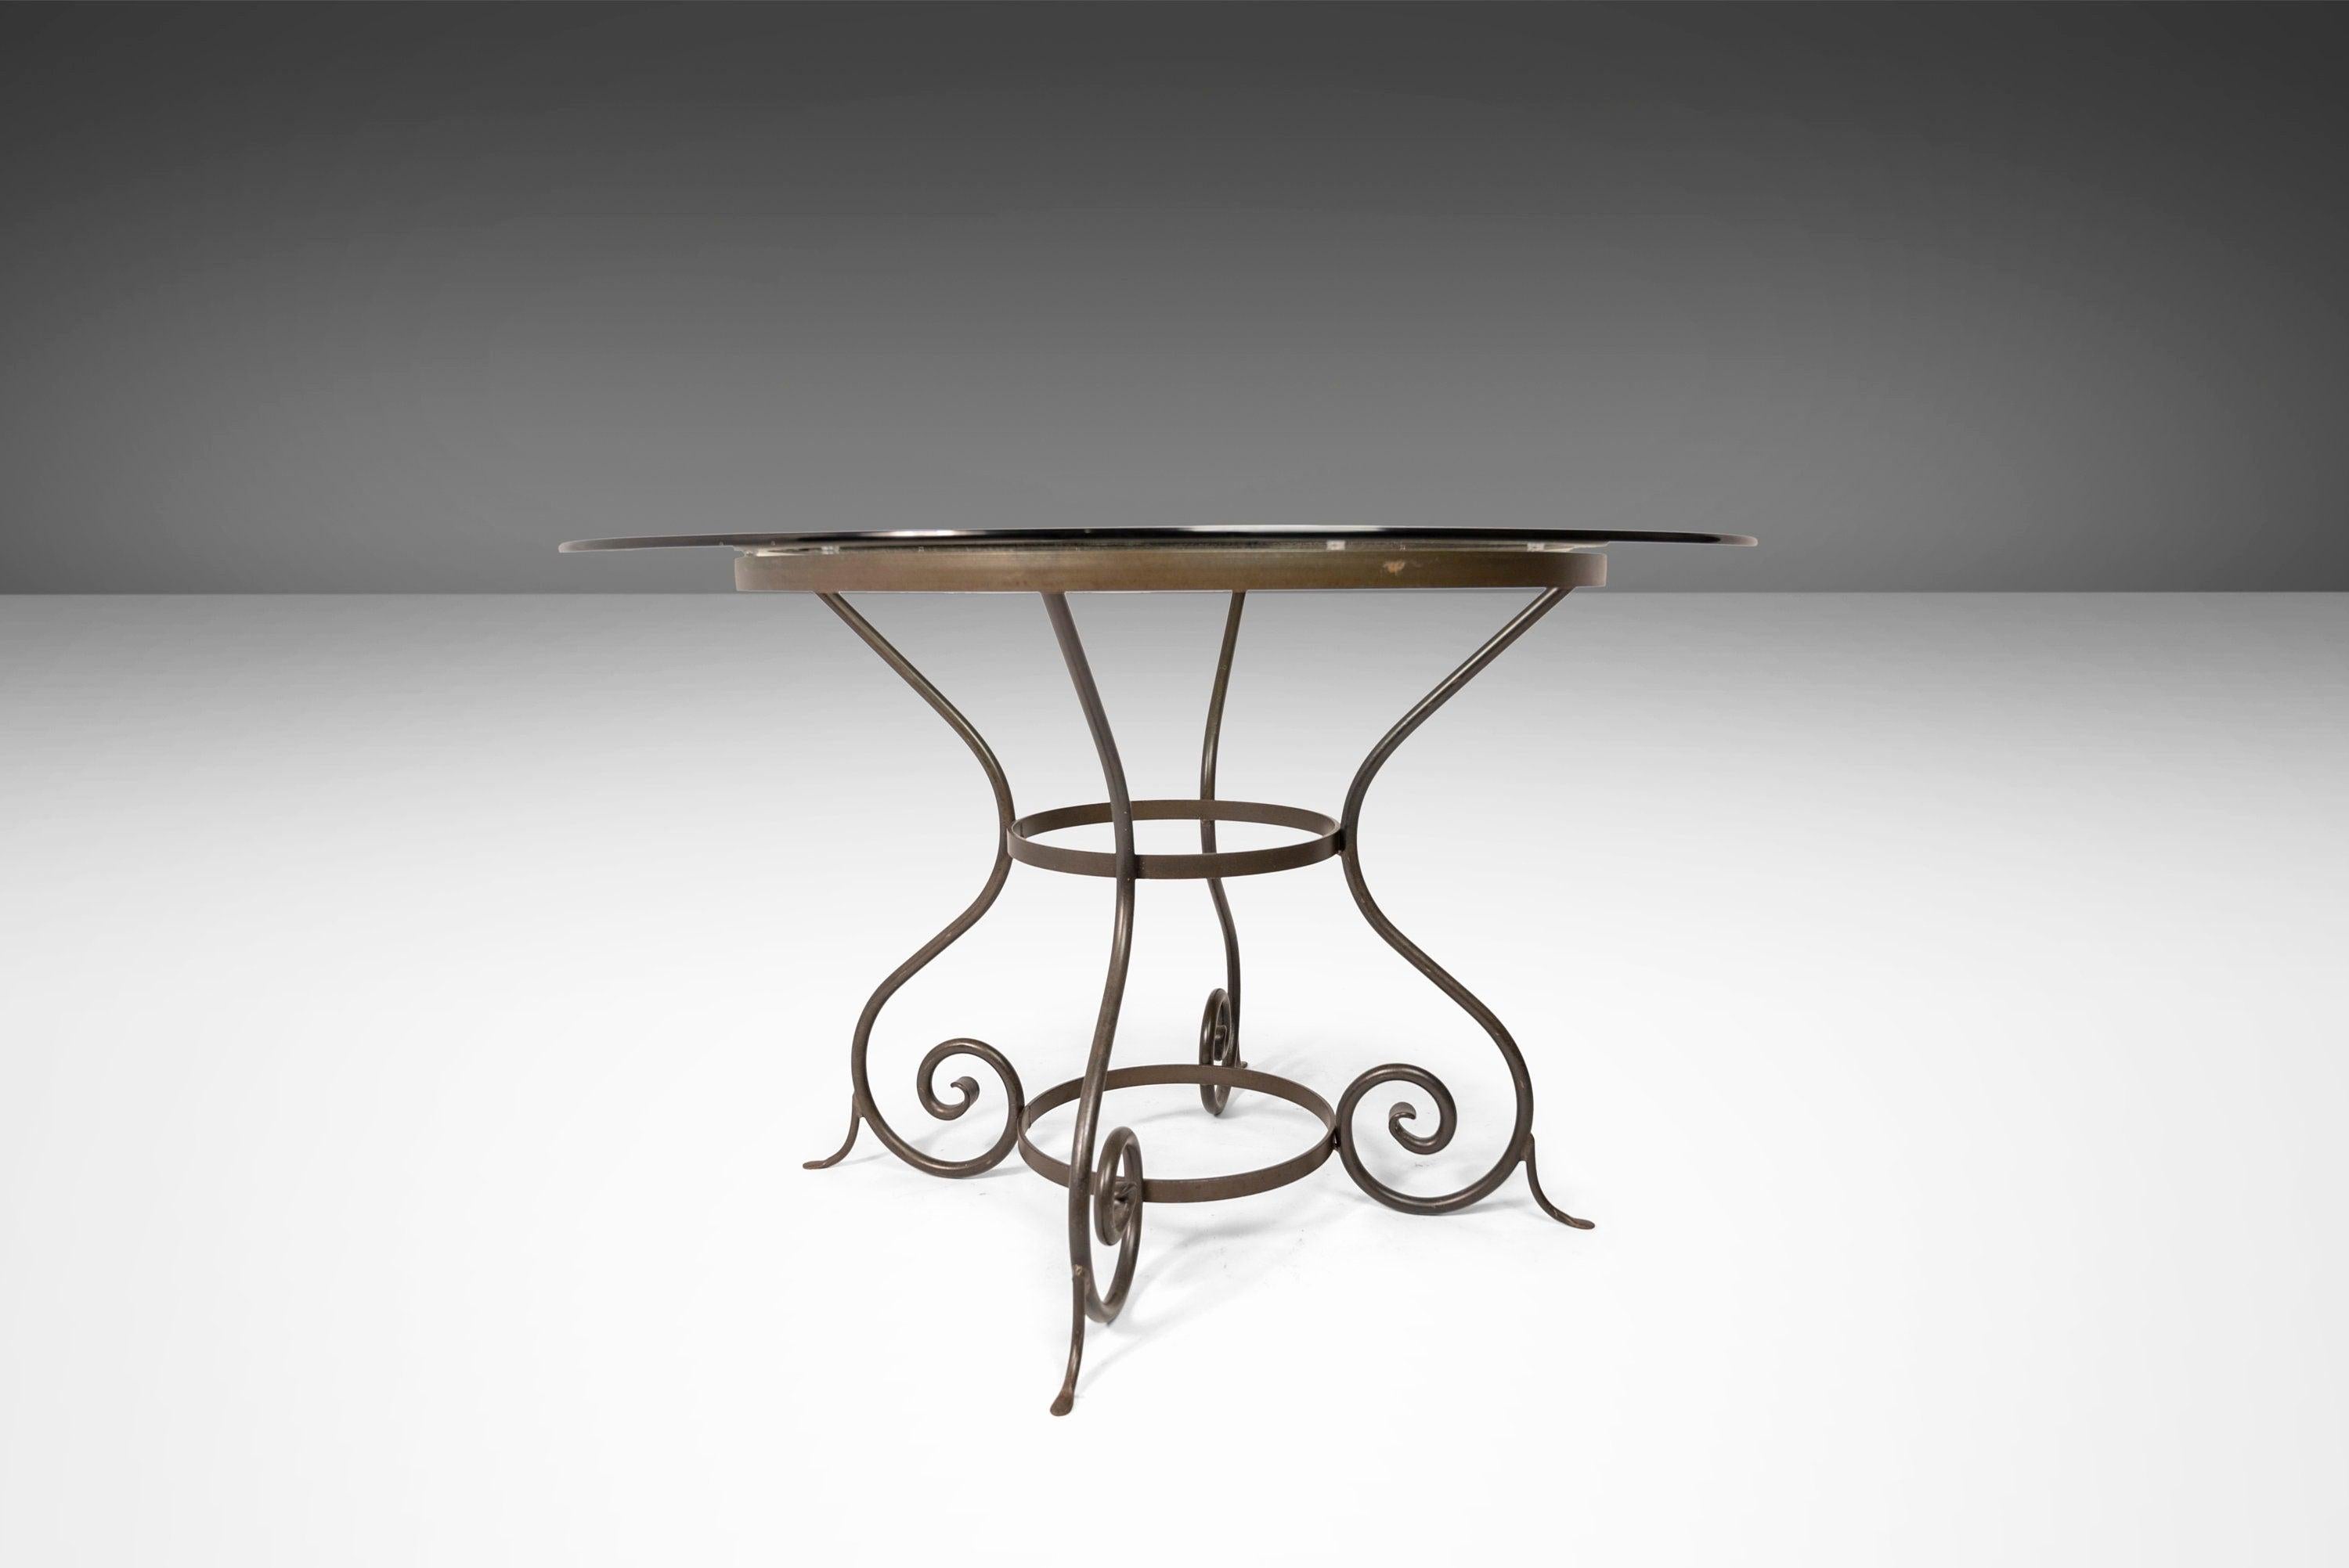 Modern Charleston Forge 'Etrusche' Iron Glass Top Dining Table, USA, c. 2000's For Sale